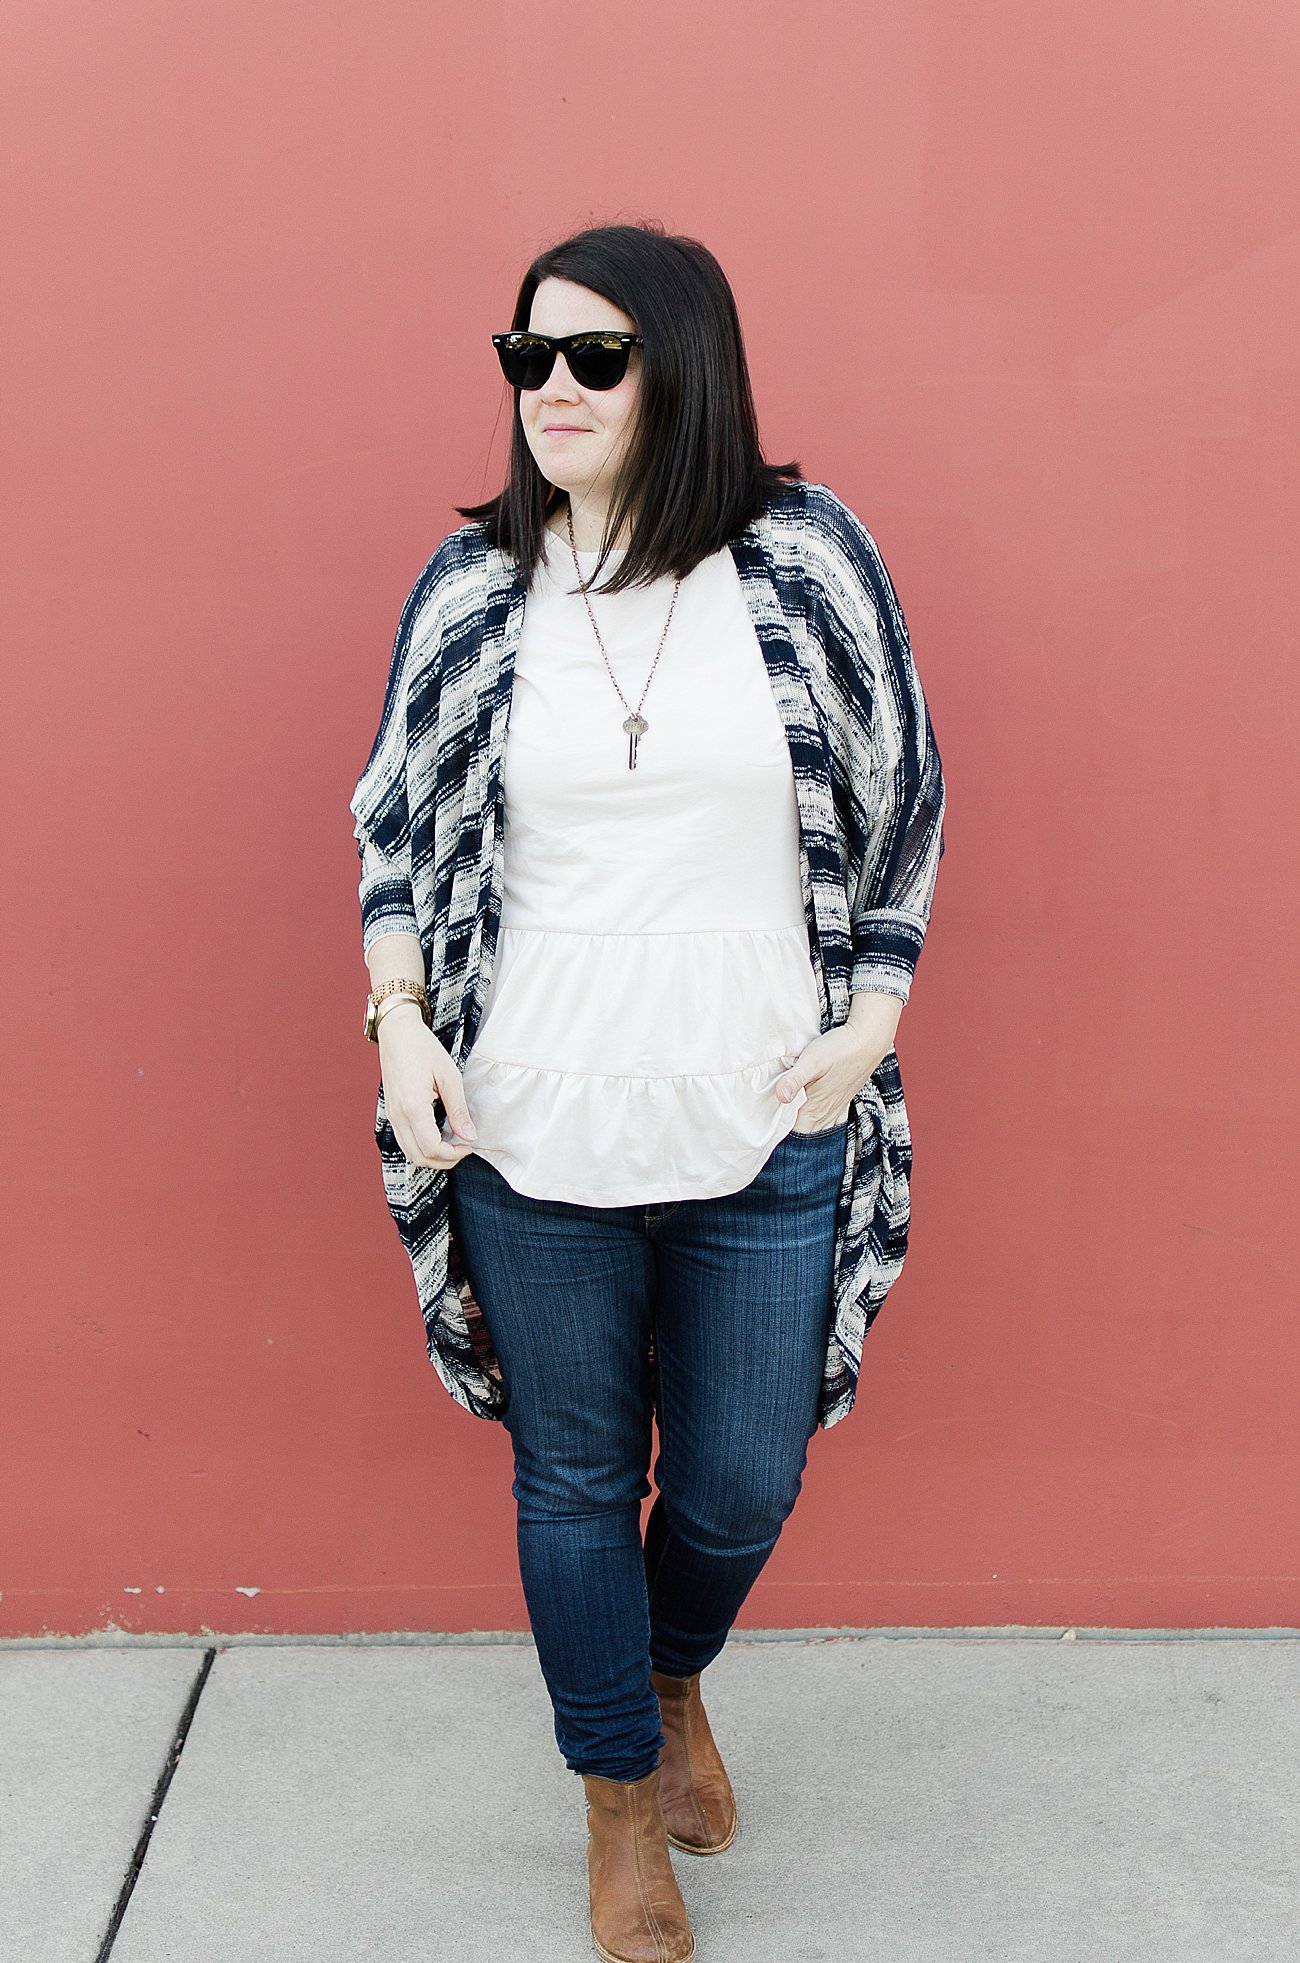 The Giving Keys, The Flourish Market, Elegantees, Paige Denim, The Root Collective booties | Ethical Fashion, fall style (2)